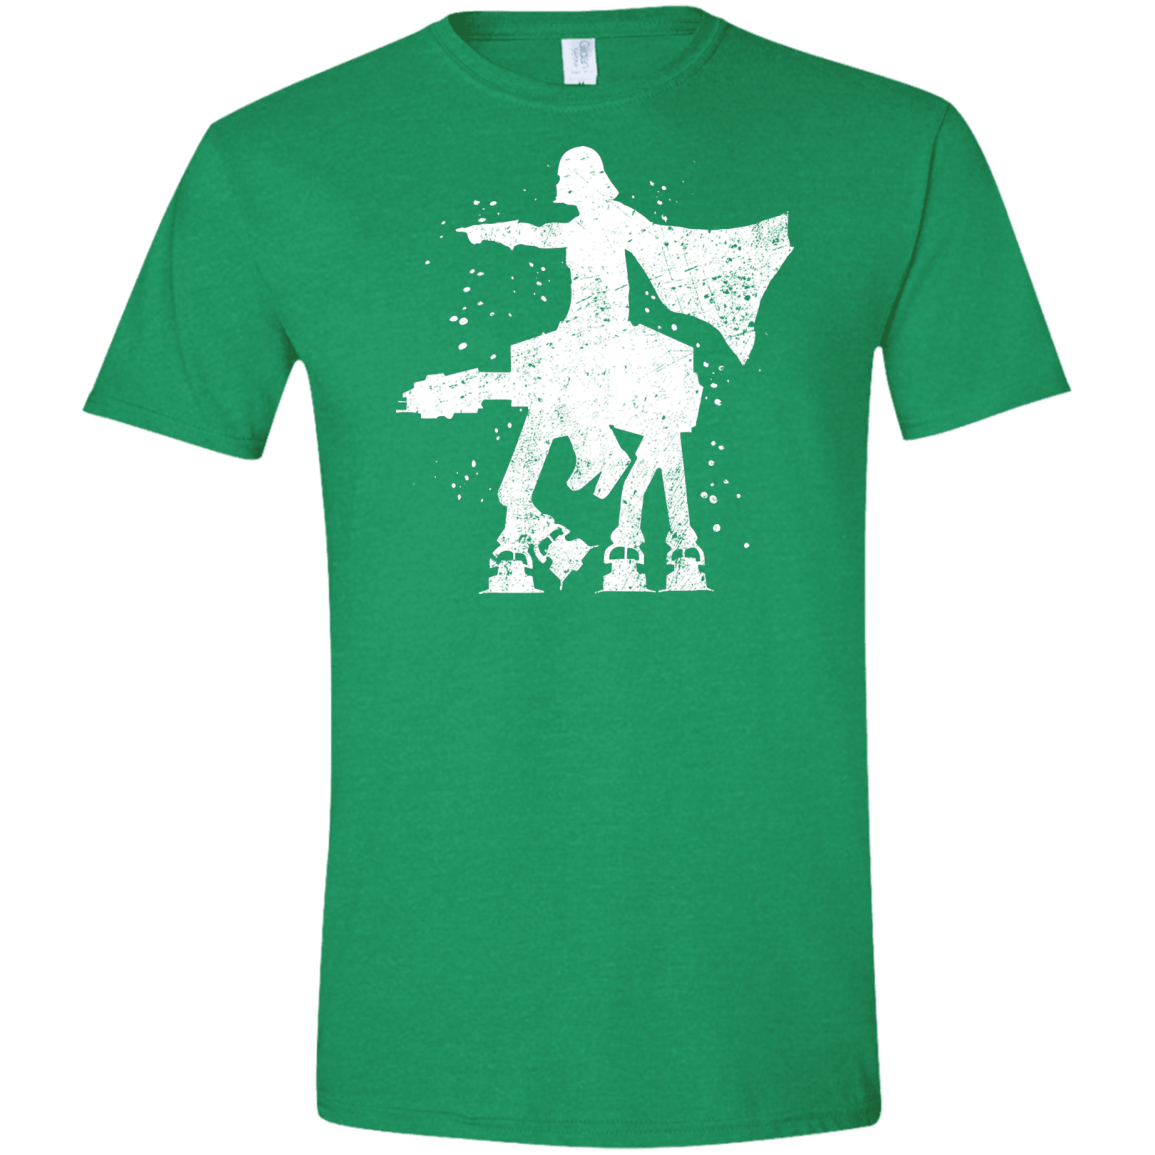 T-Shirts Heather Irish Green / S To Hoth Men's Semi-Fitted Softstyle